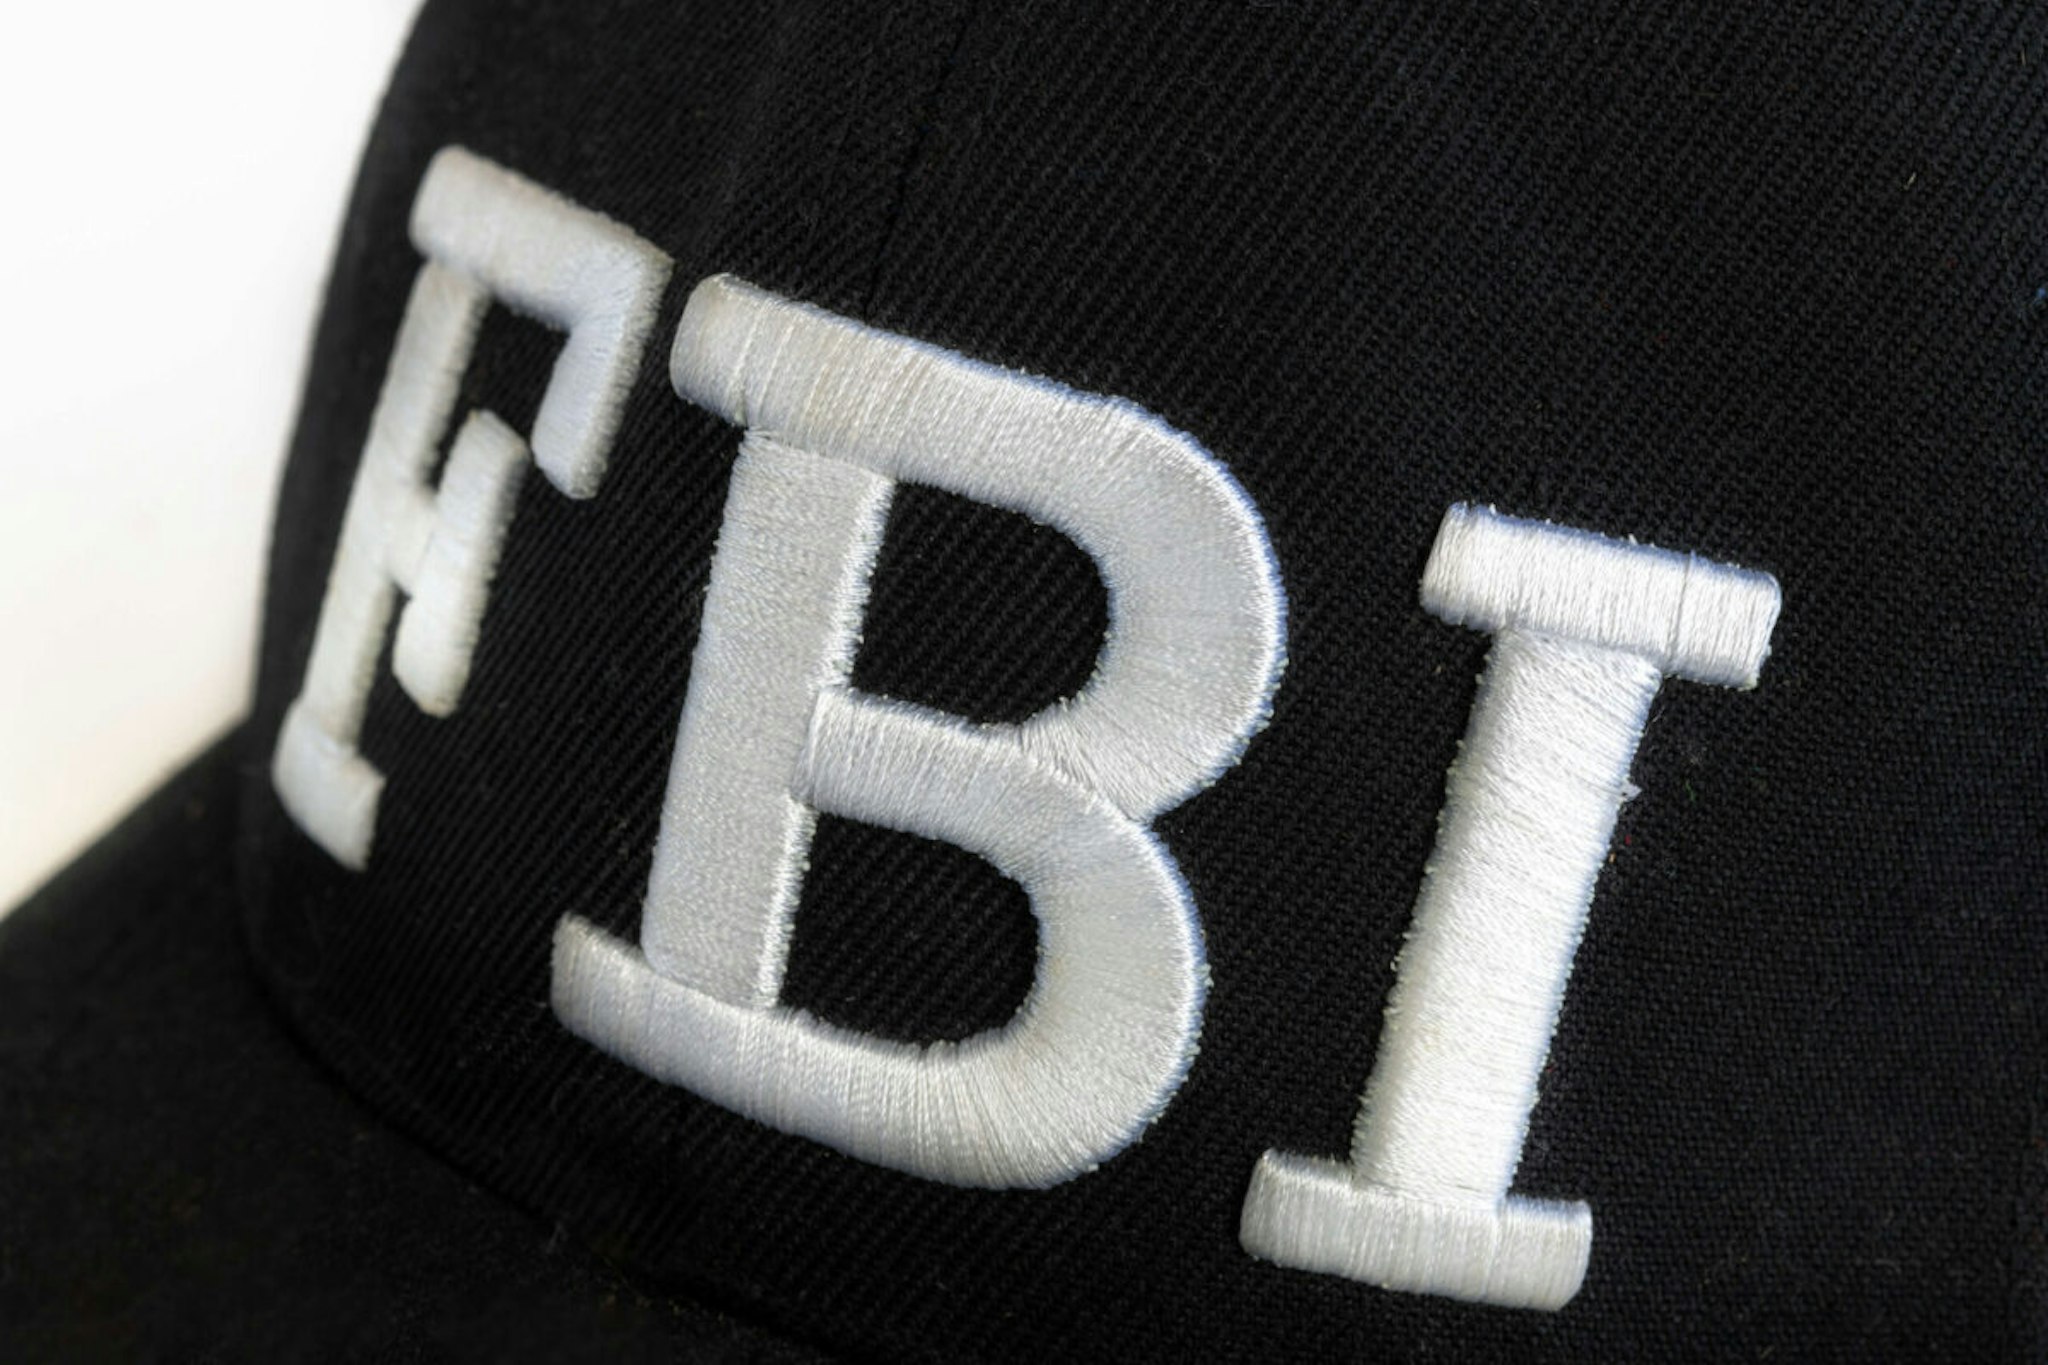 Close up of the FBI logo on a black cap. The text stands for Federal Bureau of Investigations.